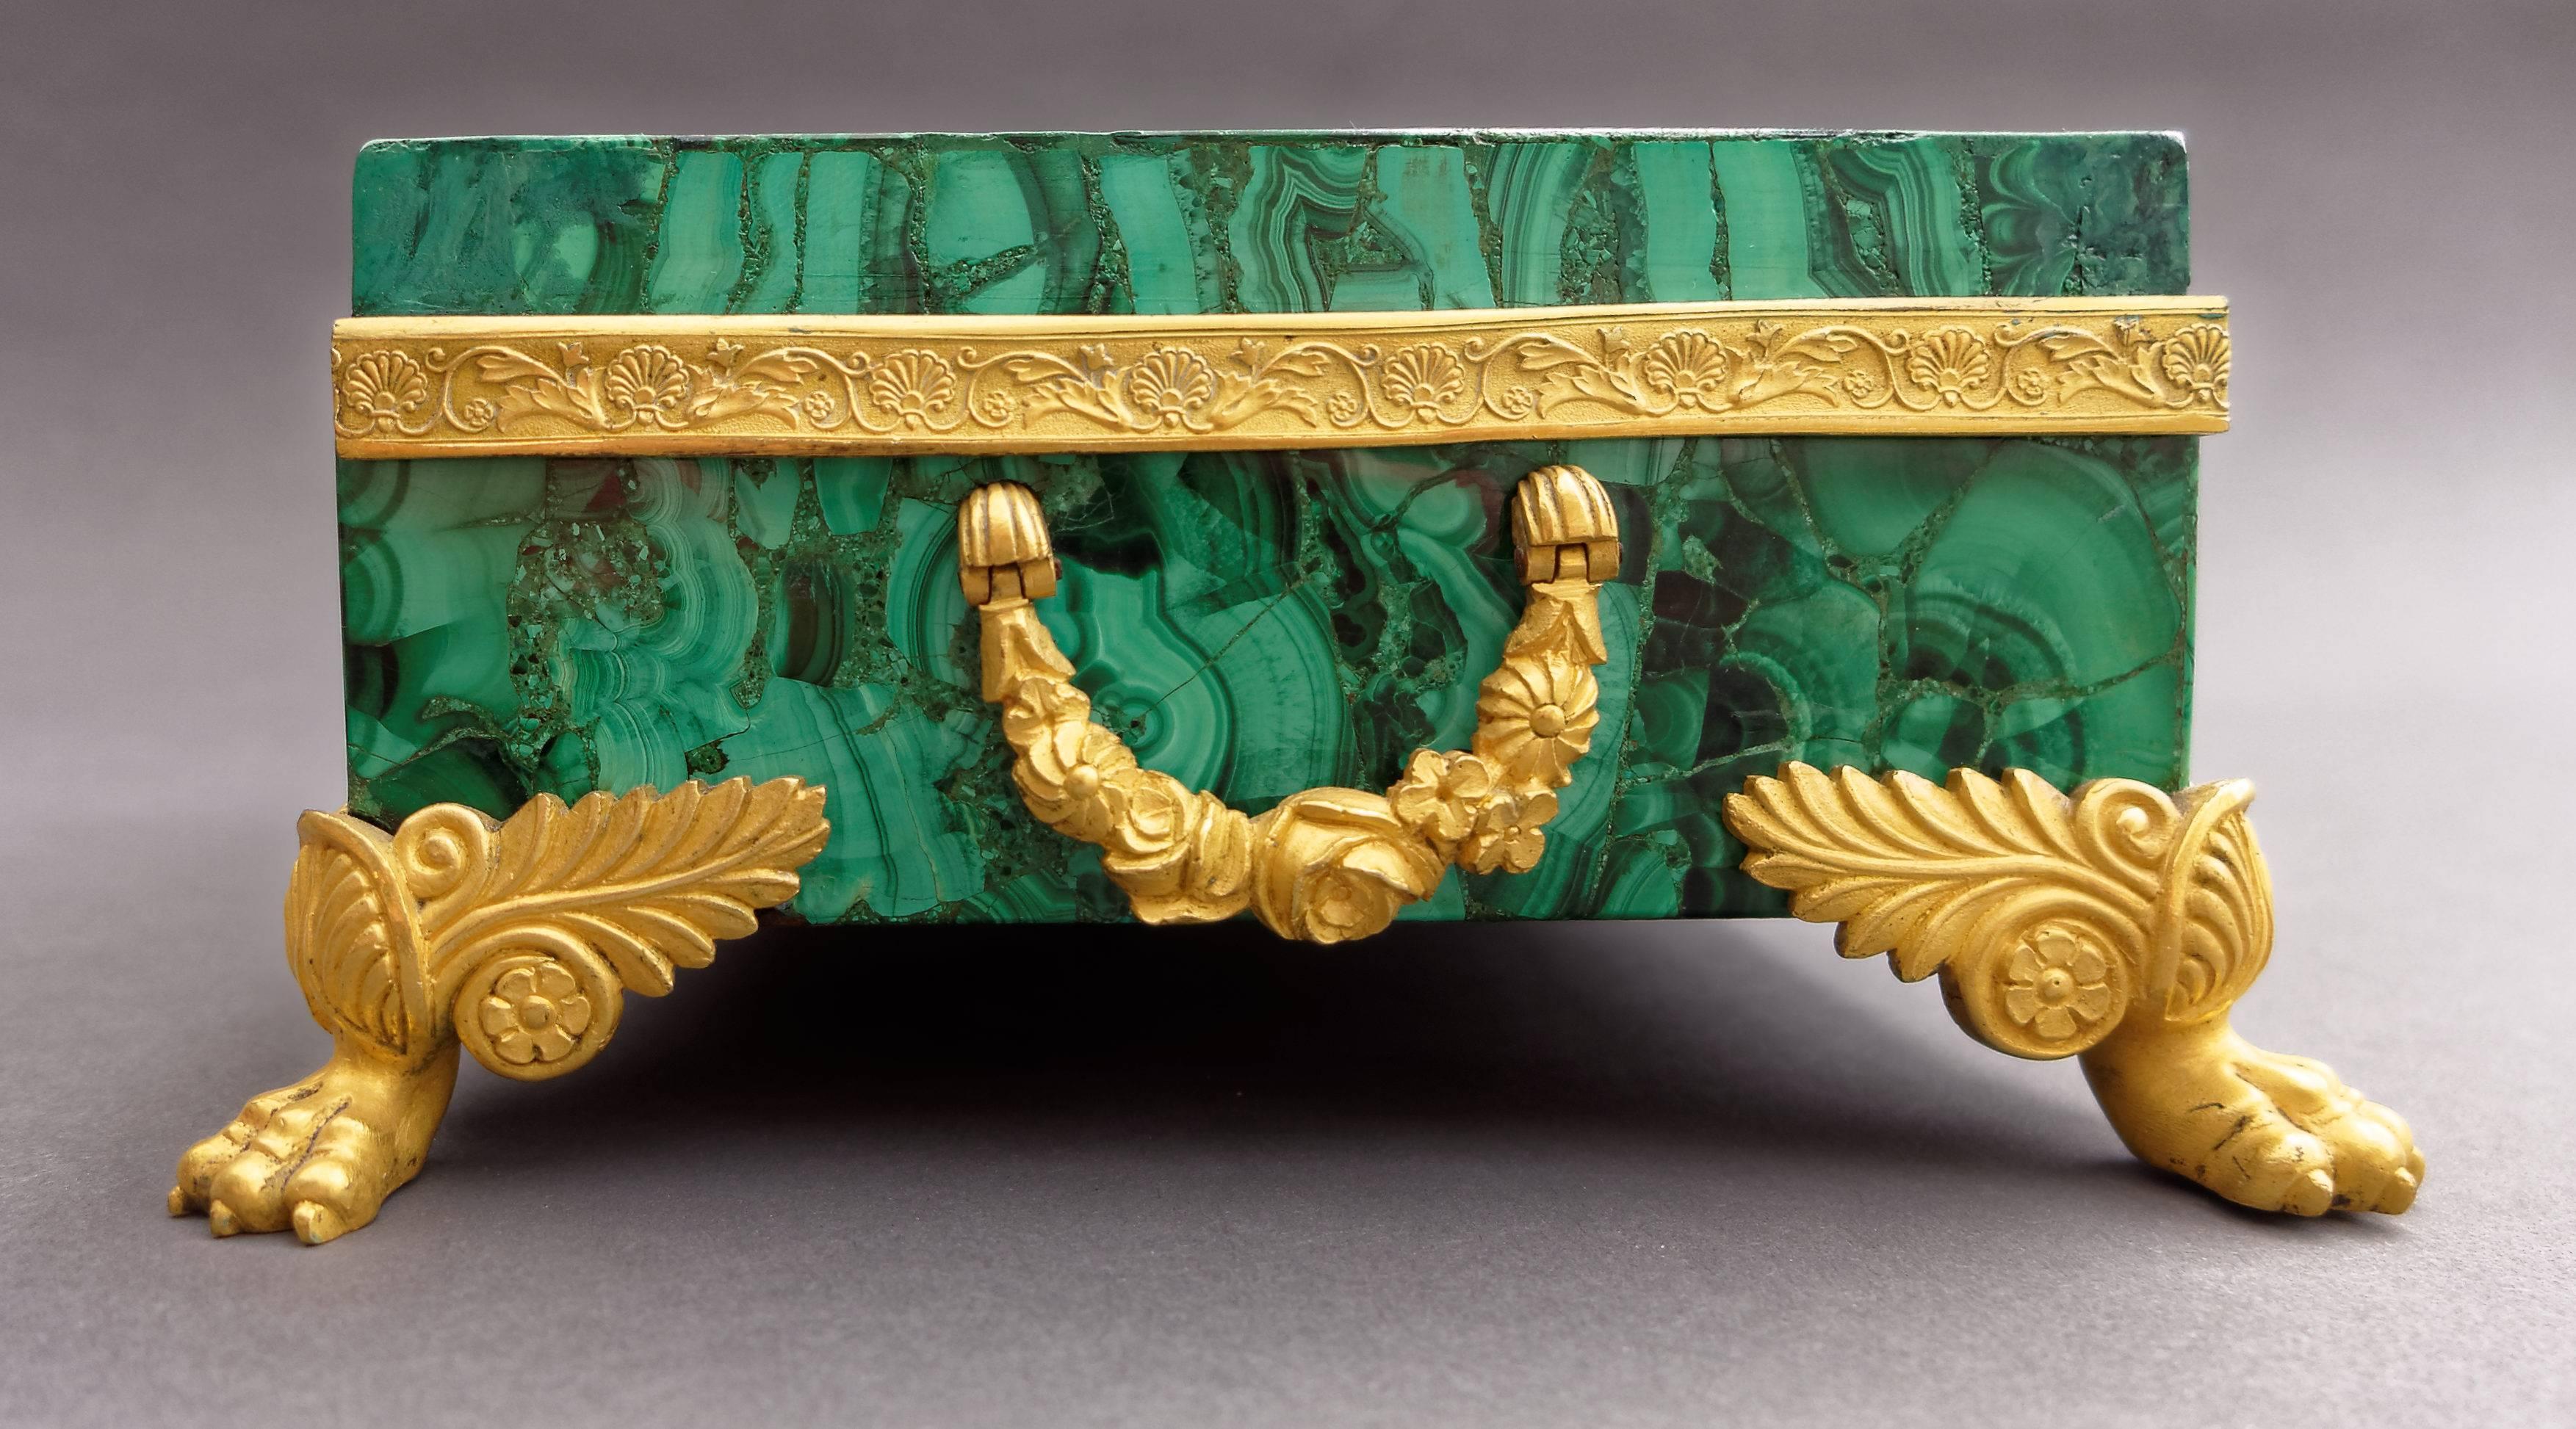 A very fine Russian giltbronze mounted malachite veneered box from the first quarter of the 19th century. Of rectangular form with hinged lid, supported on four paw feet decorated with scrolling acanthus leaves; two flower decorated handles on the